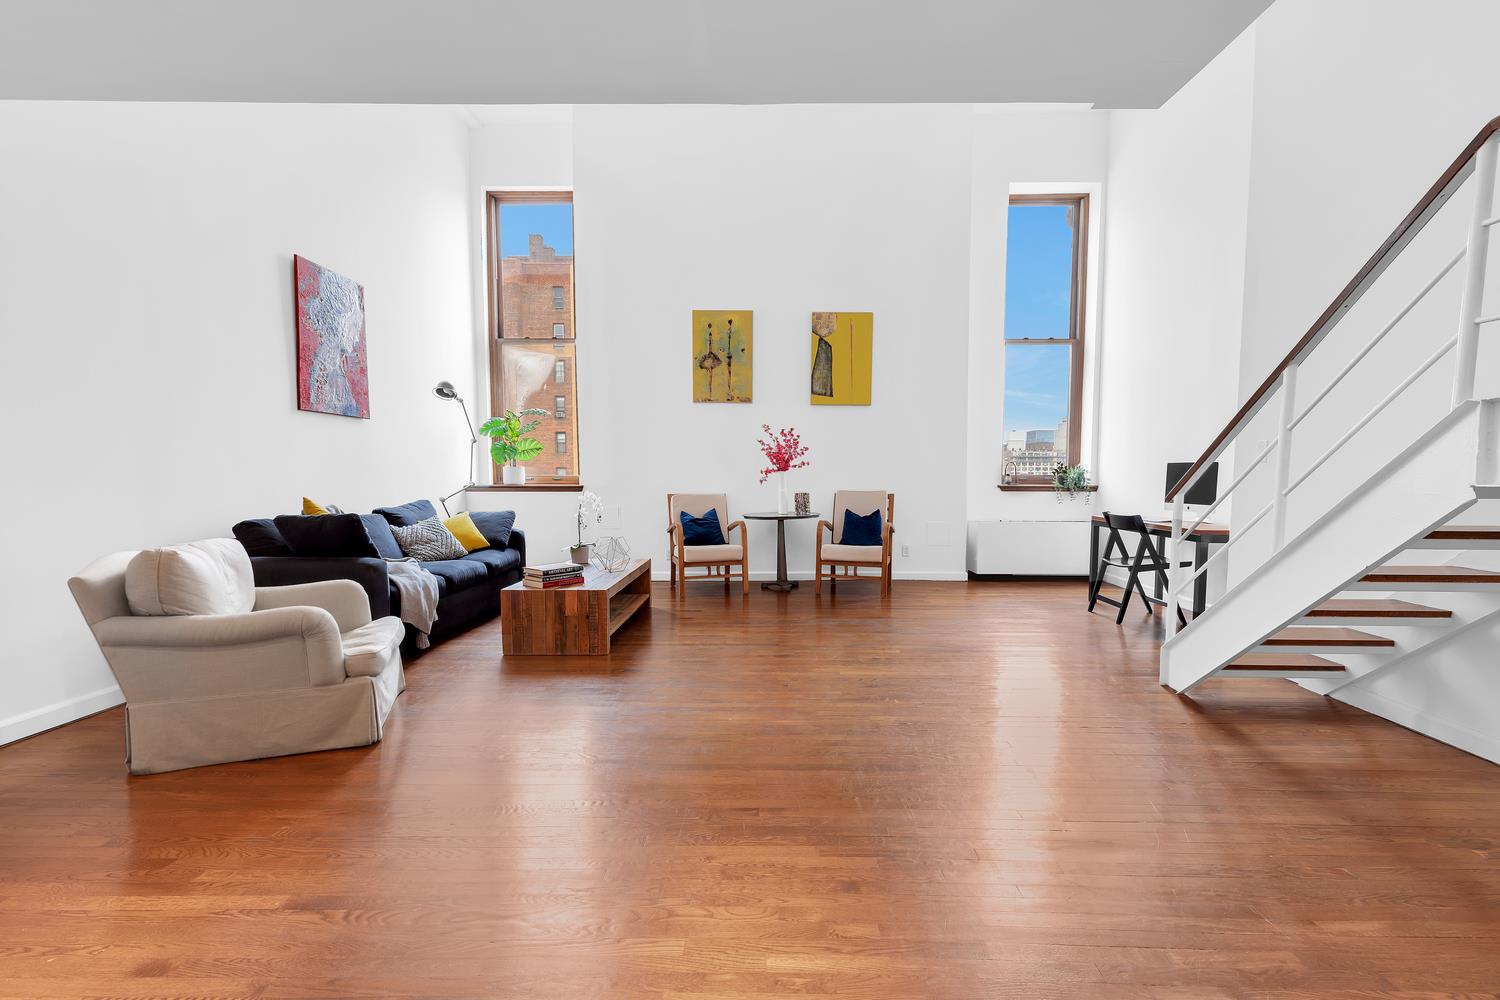 305 2nd Avenue 718, Gramercy Park, Downtown, NYC - 1 Bedrooms  
1 Bathrooms  
4 Rooms - 